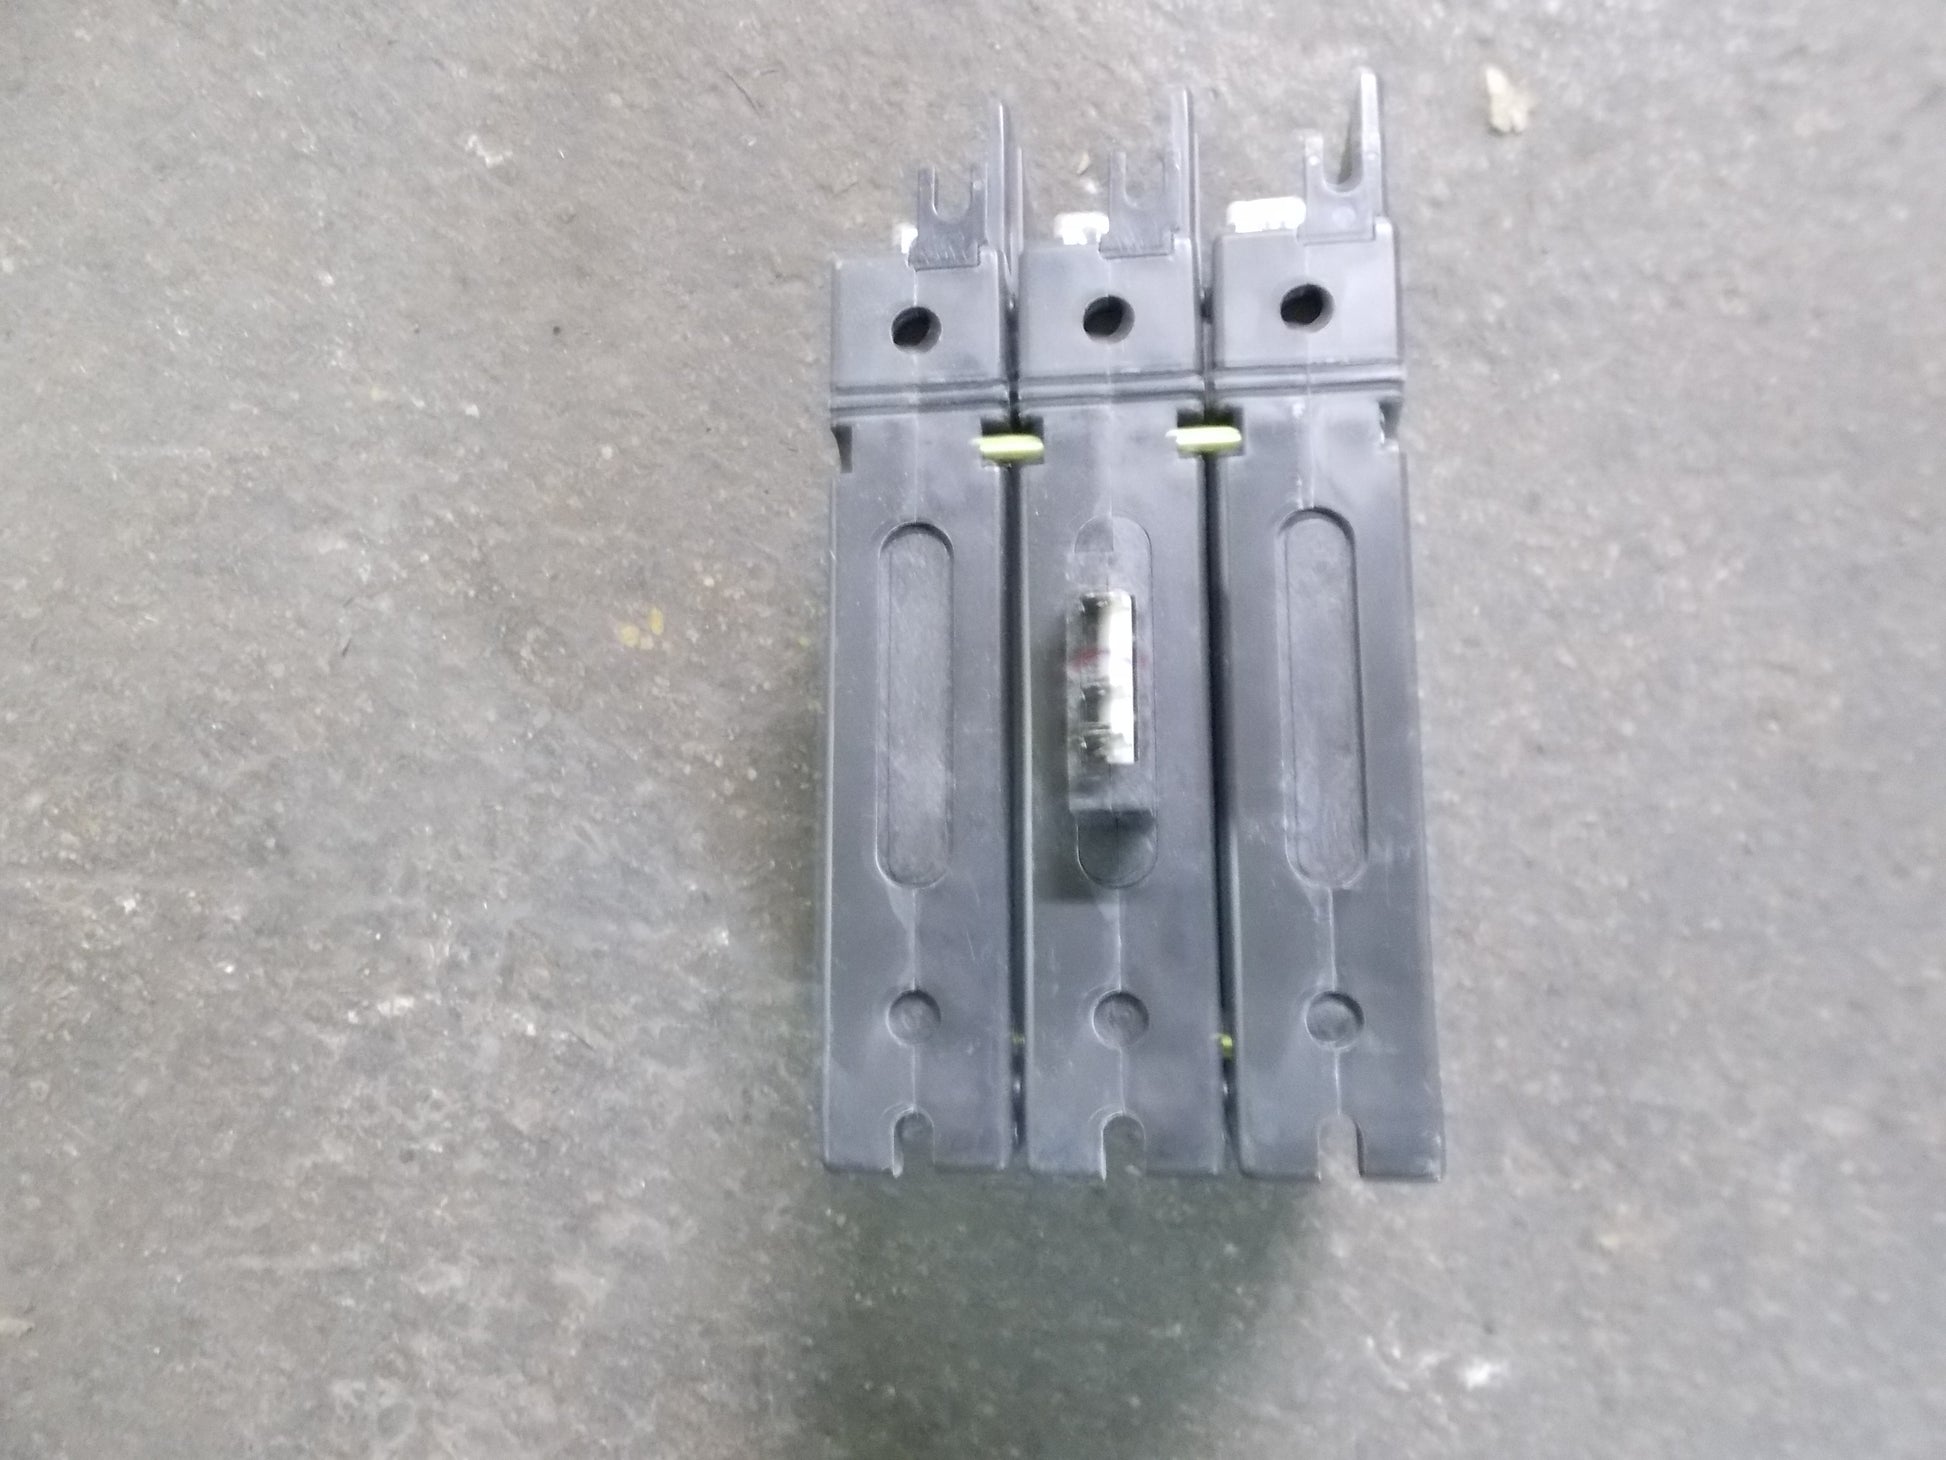 3 POLE 46.7 AMP "209 MULTI-POLE" SERIES HYDRAULIC MAGNETIC CIRCUIT BREAKER PROTECTOR 240/50-60/1 OR 3